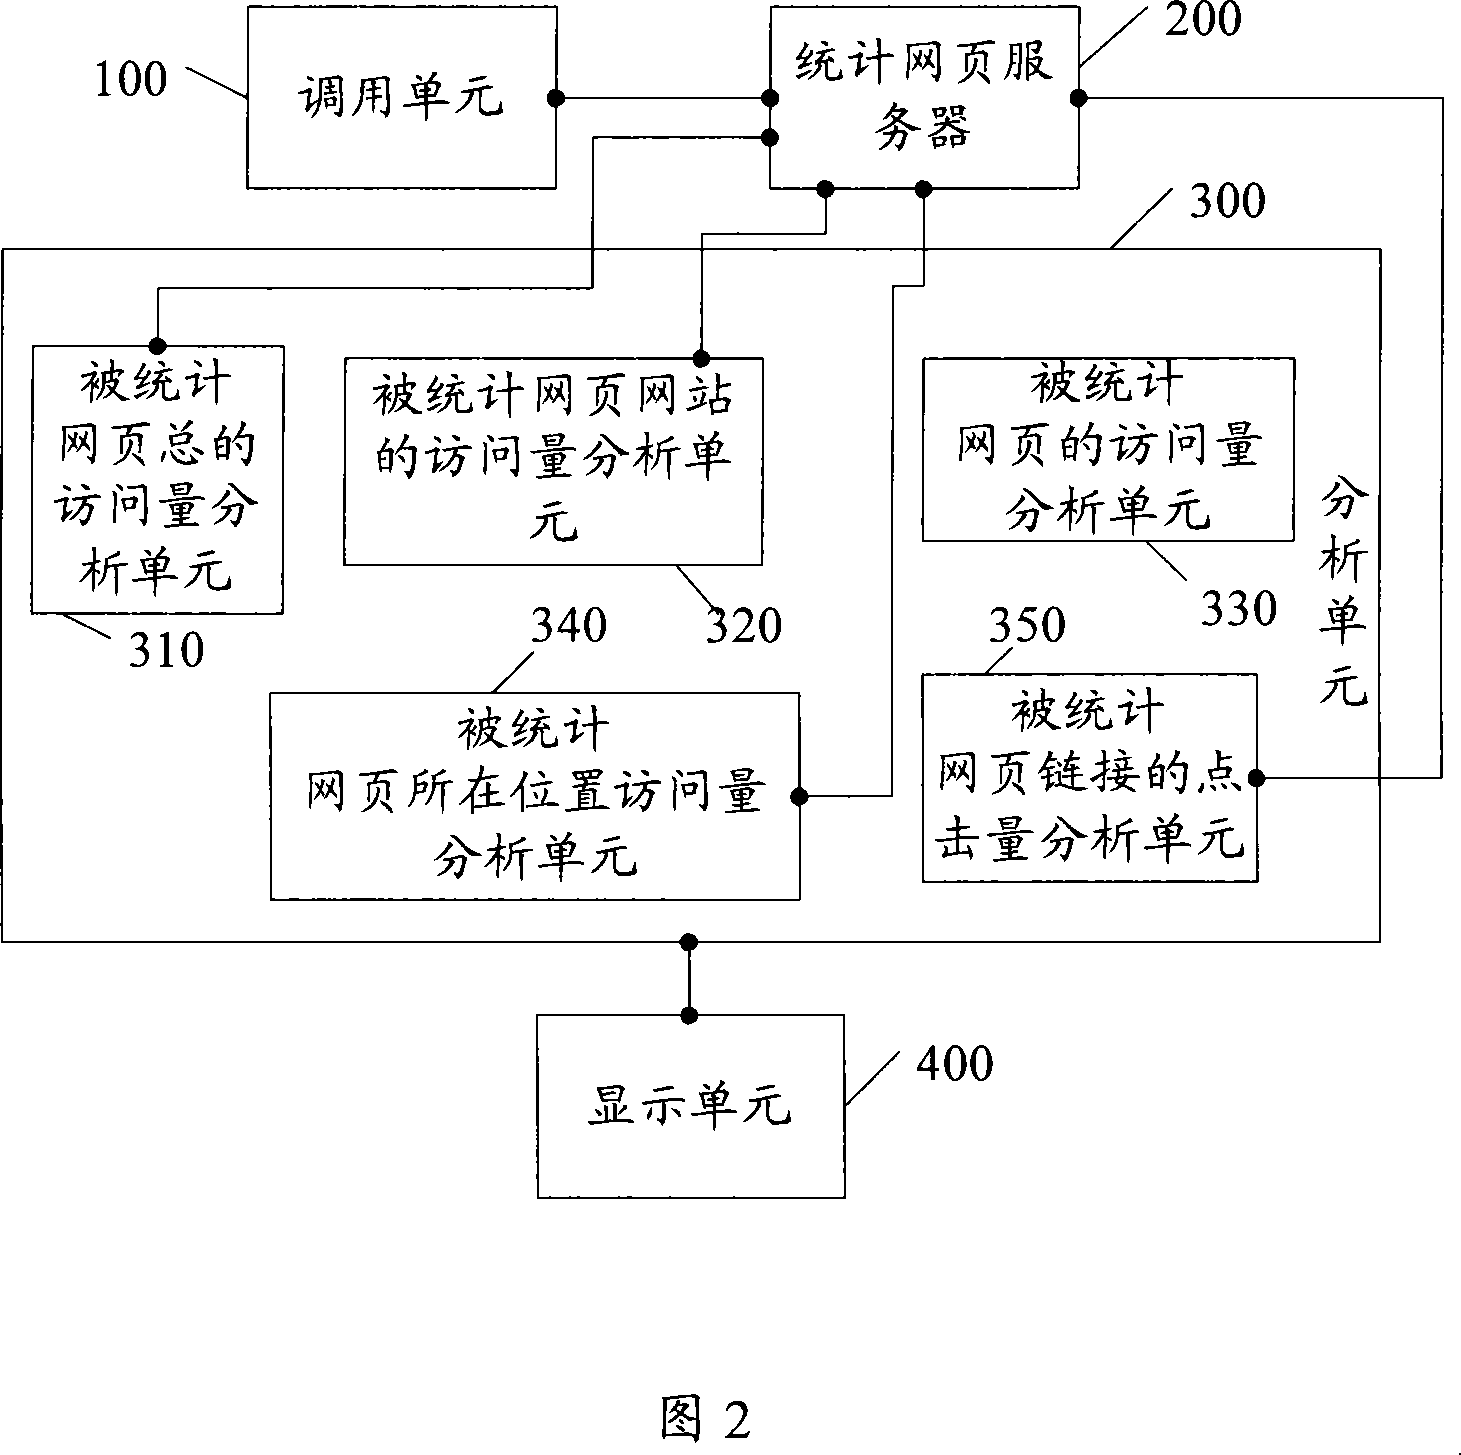 Method and system of statistical web page access data